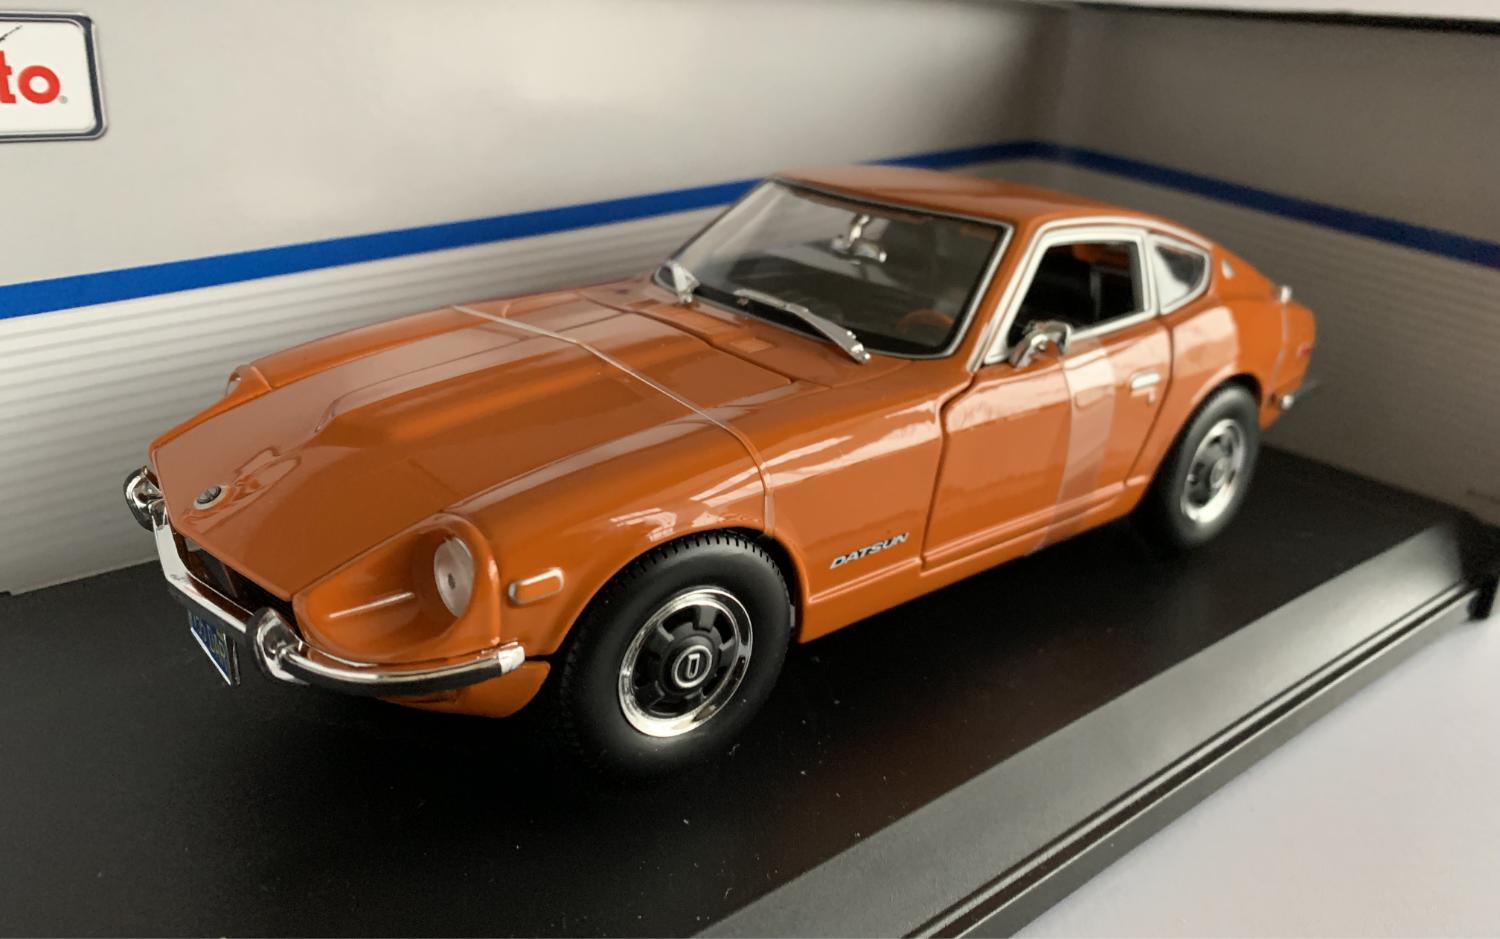 An excellent scale model of the Datsun 240Z with high level of detail throughout, all authentically recreated.